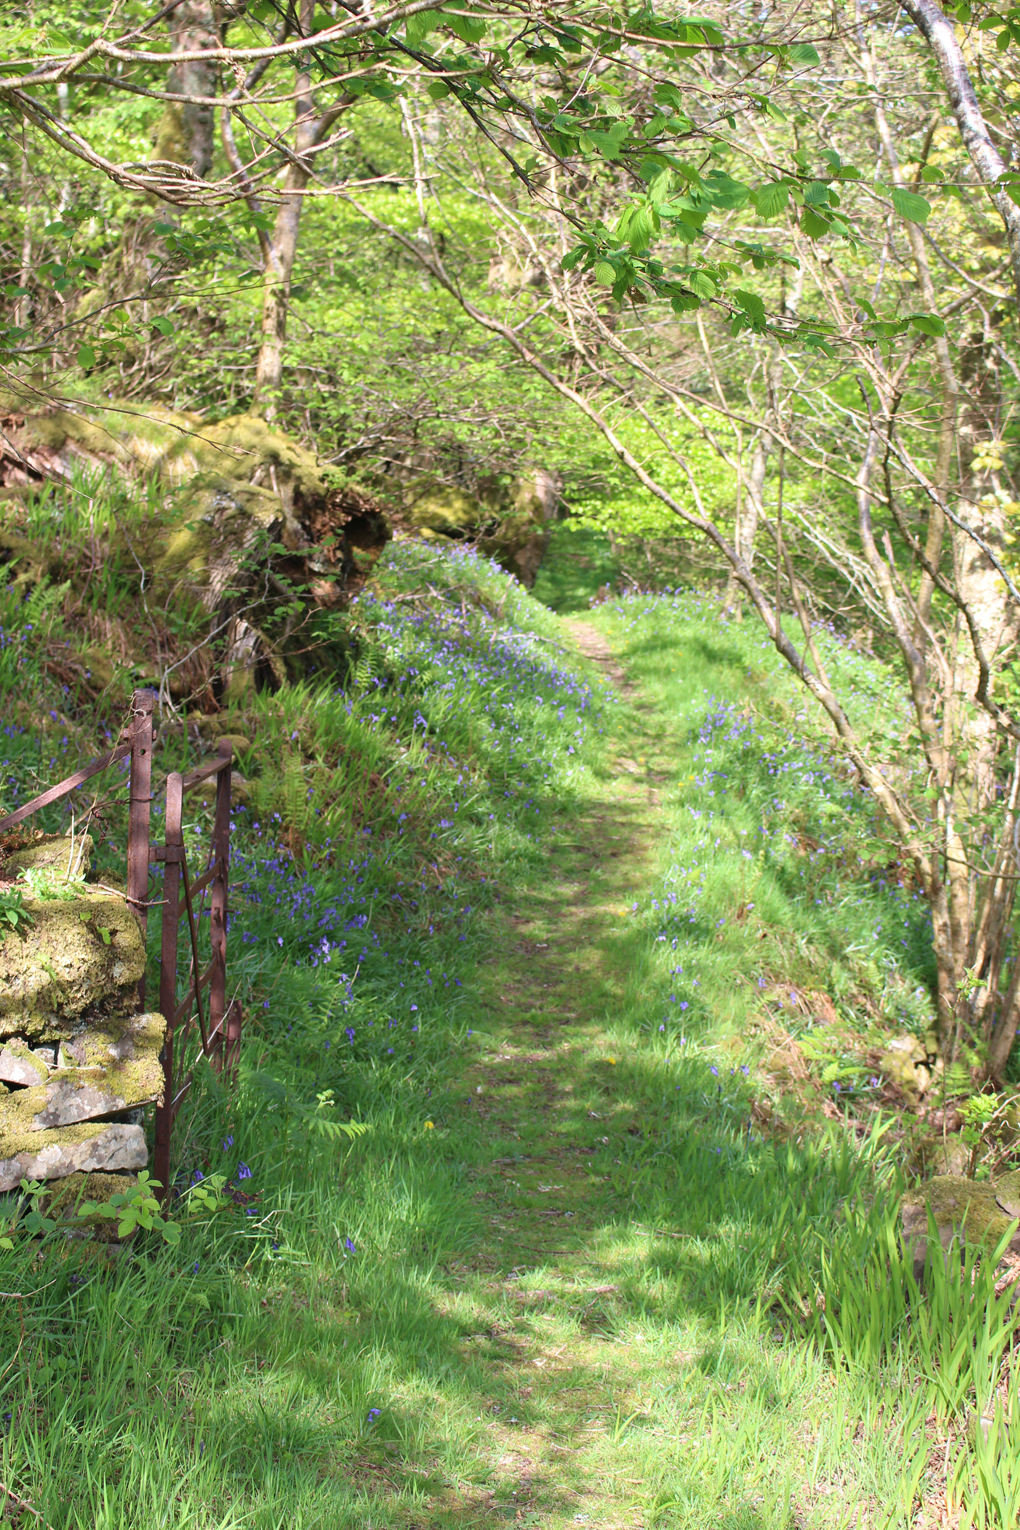 A grassy footpath covered in dappled sunlight winds its way invitingly through an old gateway and into a wood of fresh green leaves and bluebells.